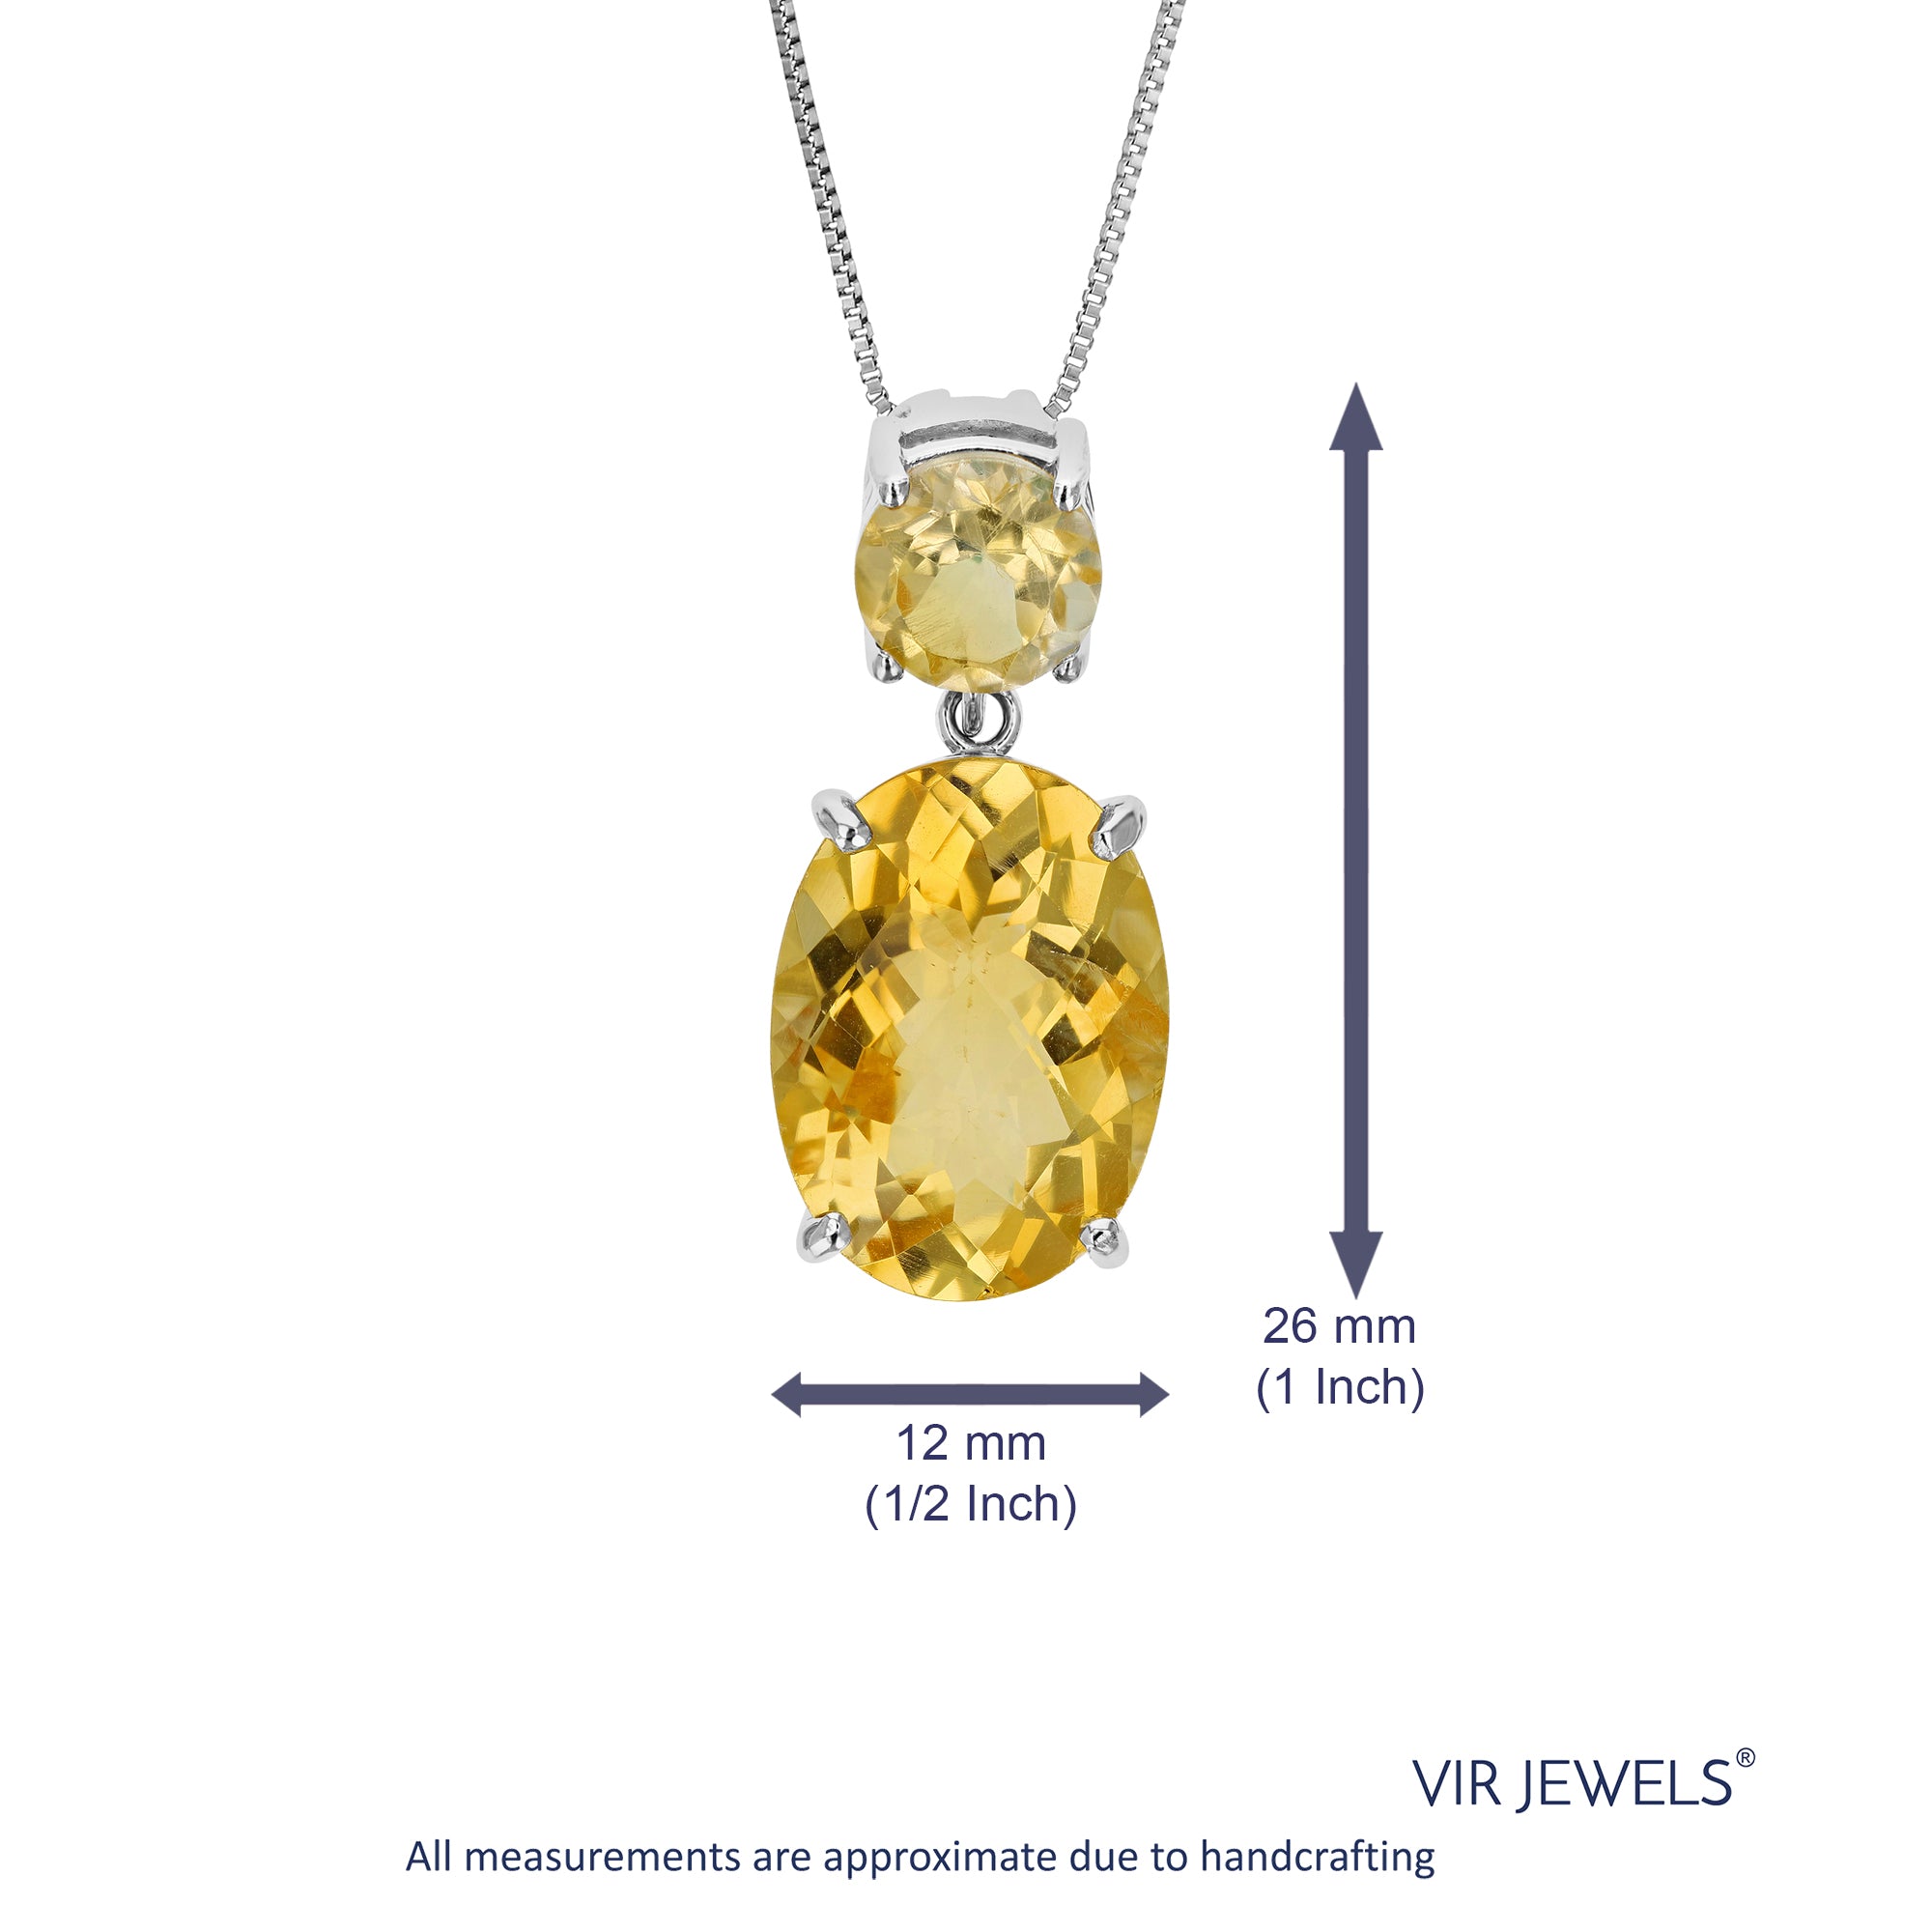 5.5 cttw Pendant Necklace, Citrine Oval Pendant Necklace for Women in .925 Sterling Silver with 18 Inch Chain, Prong Setting